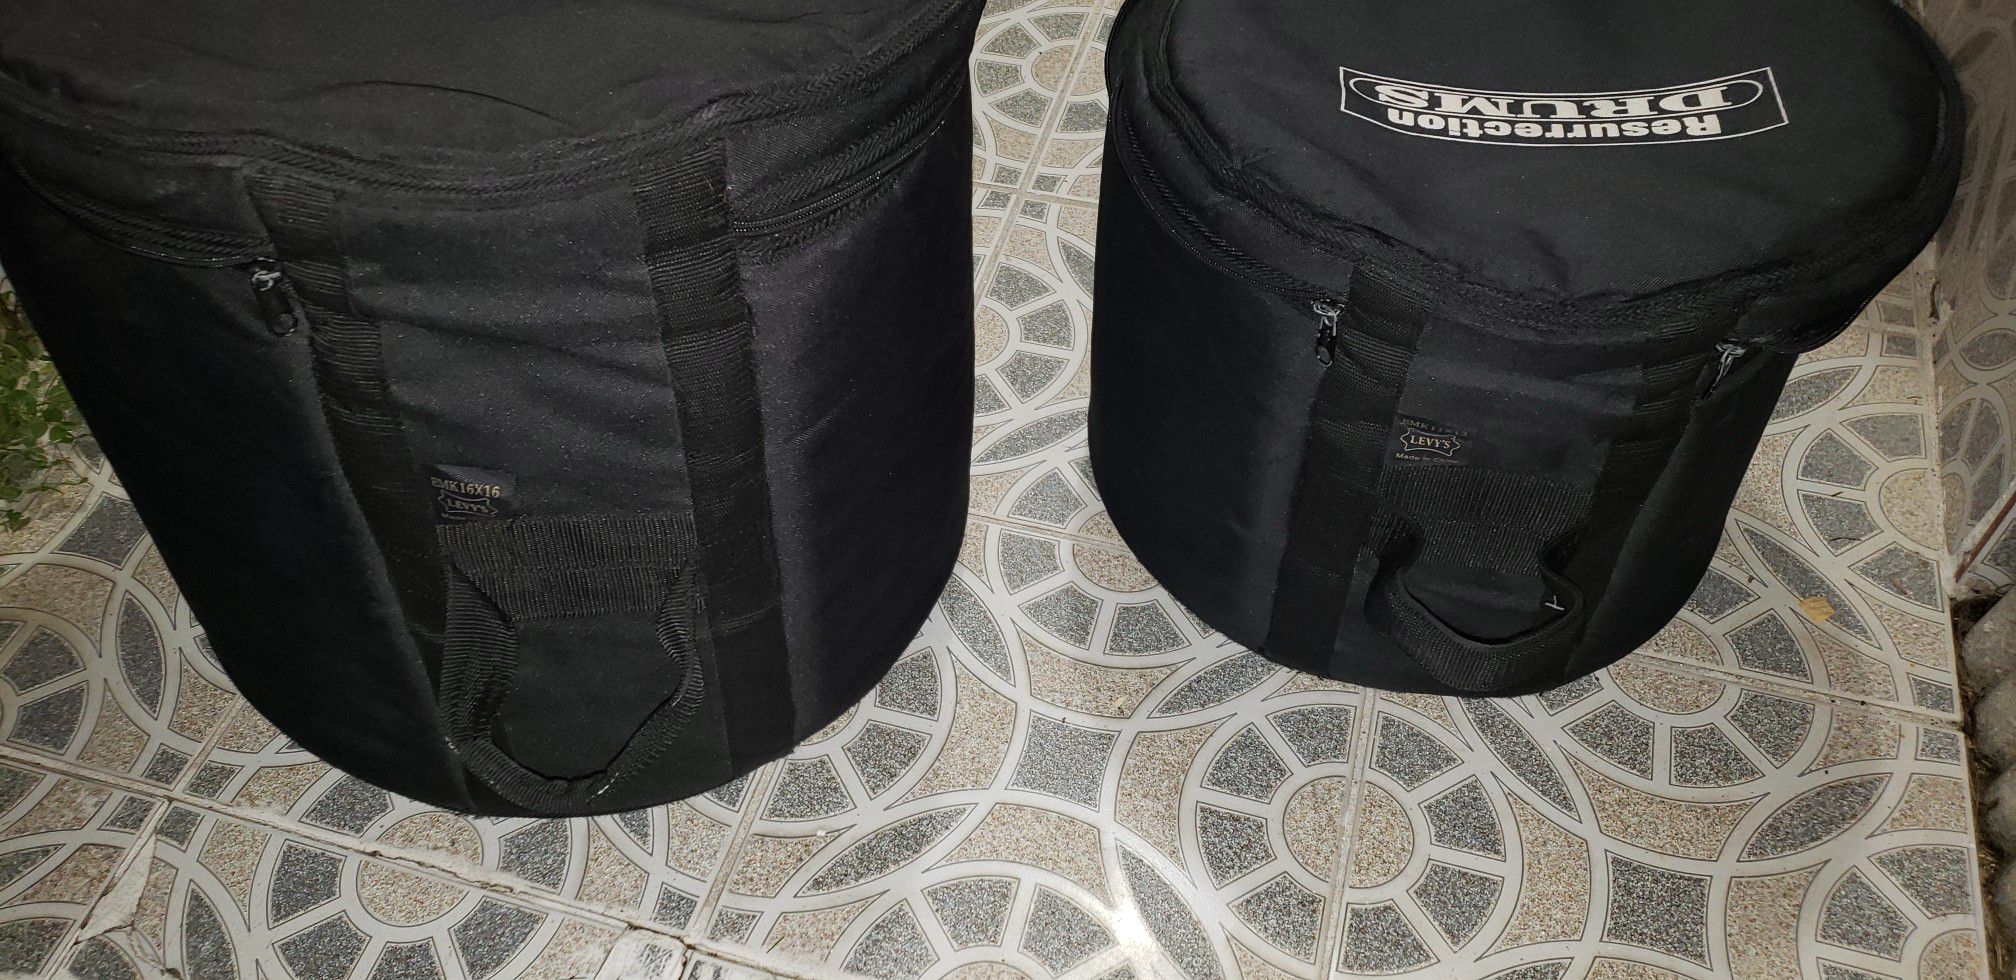 Levi's gig bags for drums